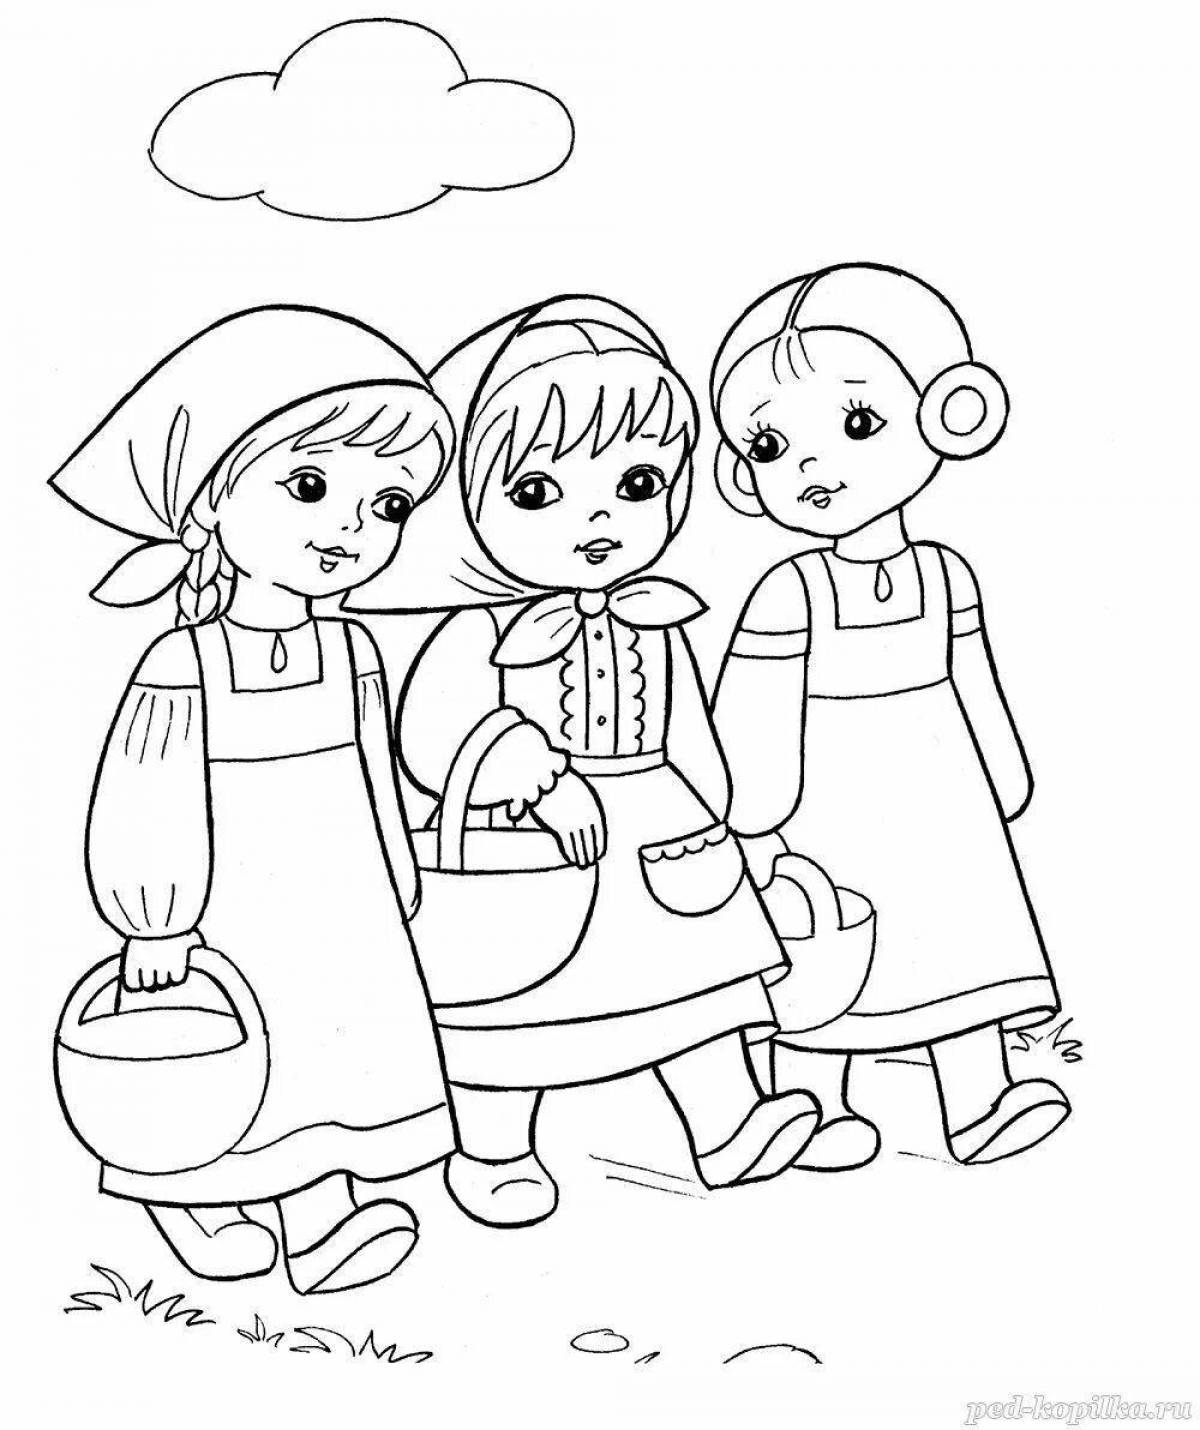 Inspiring story coloring book for girls